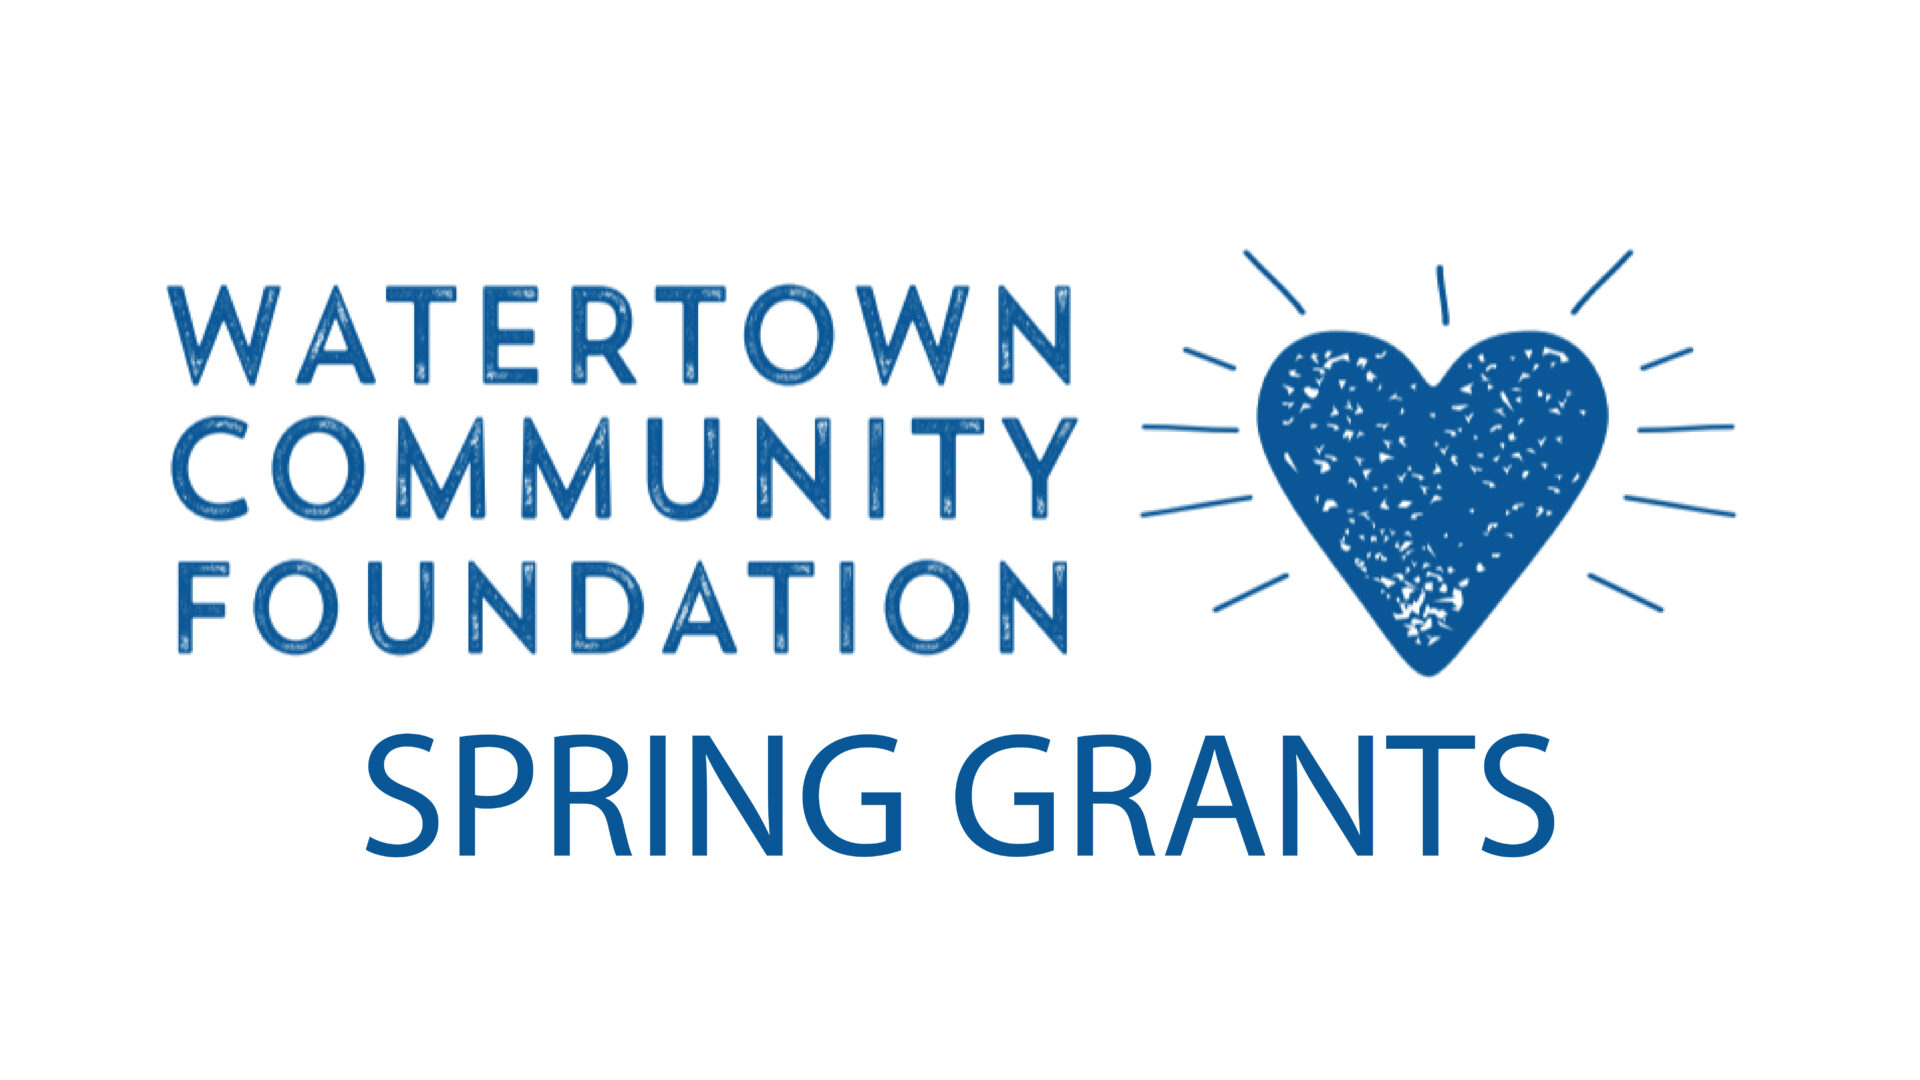 Watertown Community Foundation Awards $110K in Grants to Local Organizations